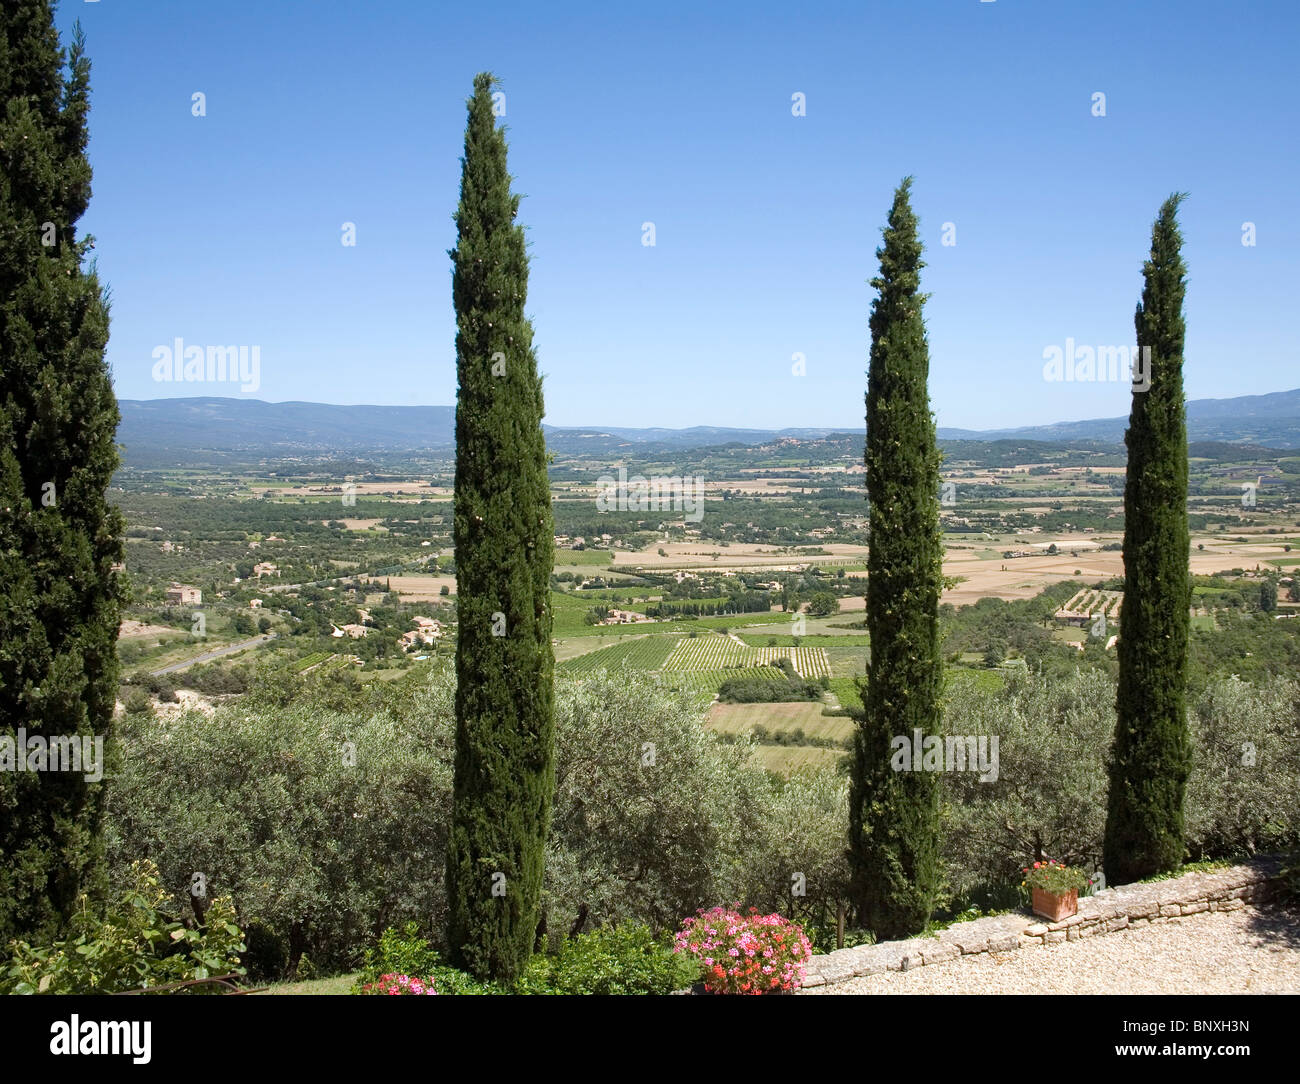 View from Village of Gordes of the plains of Provence in France Stock Photo